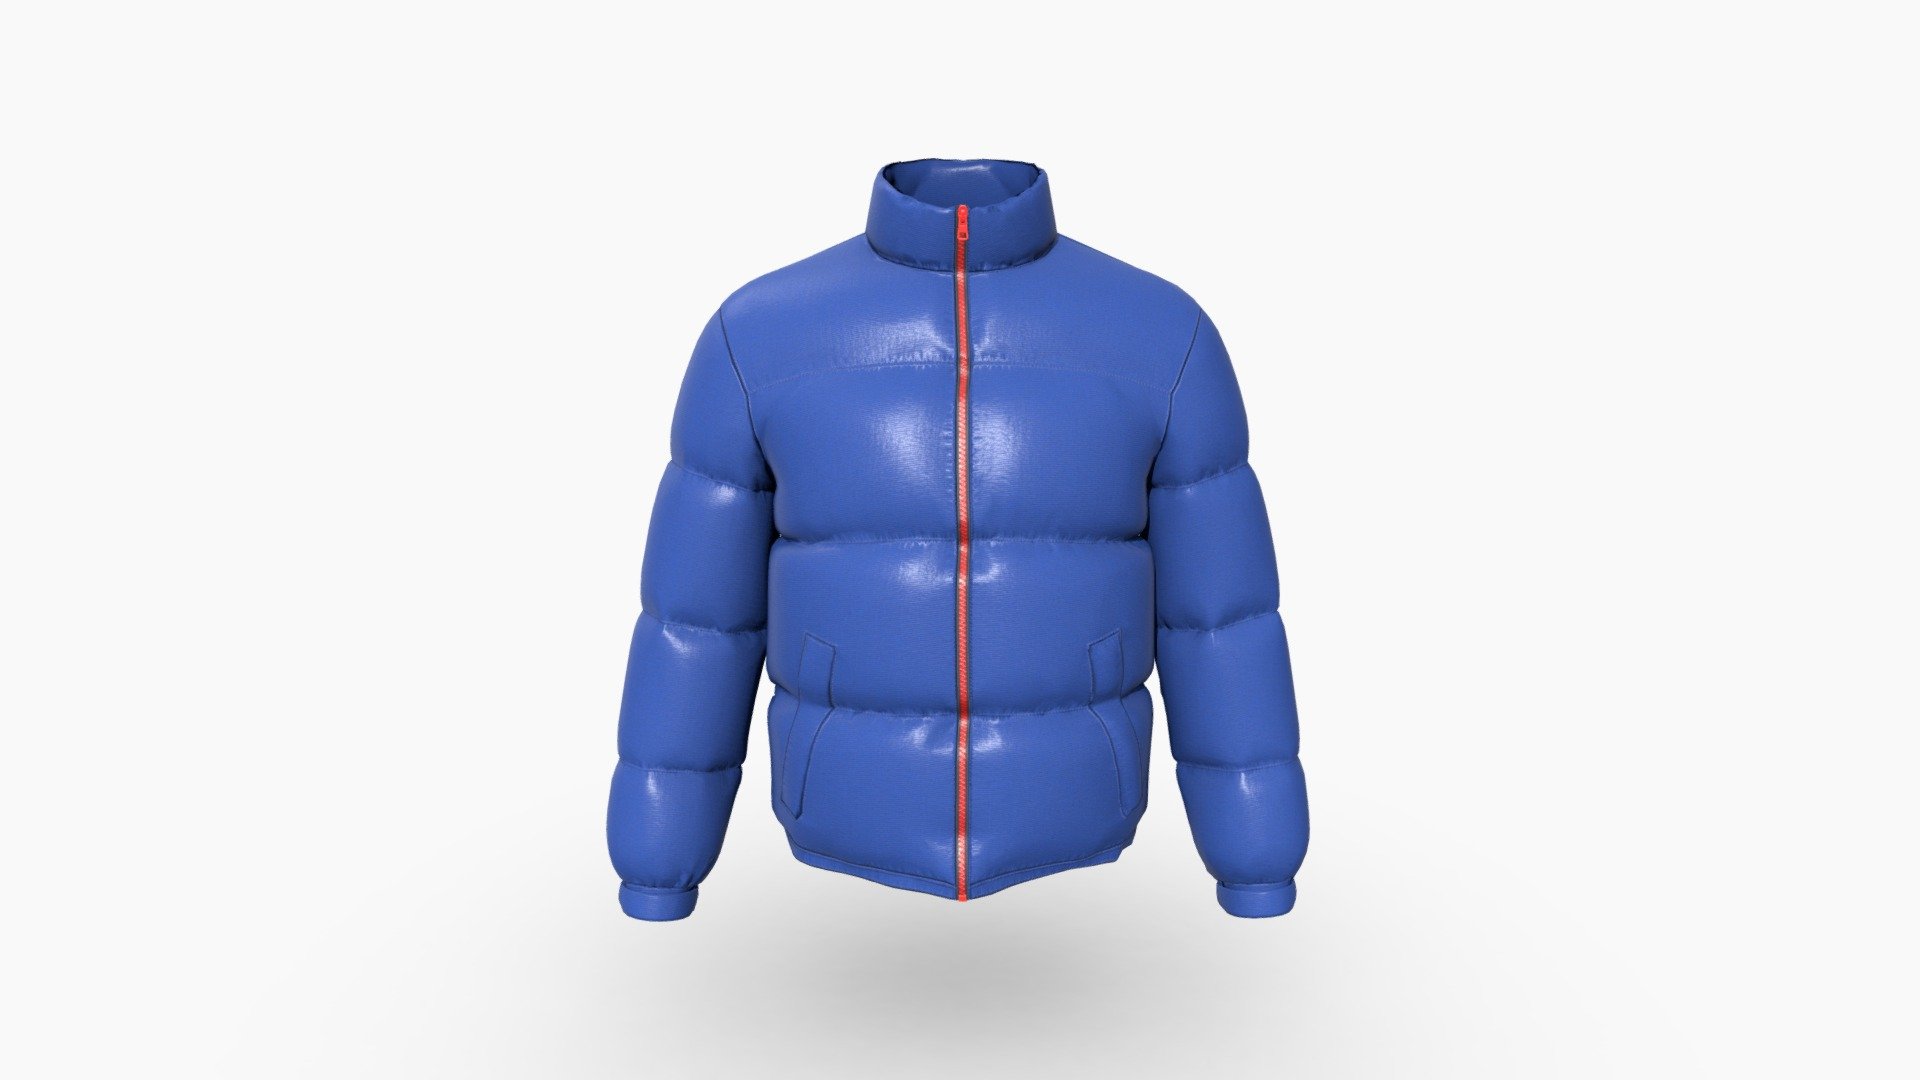 Men Padded Jacket
Version V1.0

Realistic high detailed Men Padded Jacket with high resolution textures. Model created by our unique processing &amp; Optimized for 3D web and AR / VR

Features

Optimized &amp; NON-Optimized obj model with 4K texture included




Optimized for AR/VR/MR

4K &amp; 2K fabric texture and details

Optimized model is 1.81MB

NON-Optimized model is 18.0MB

Woven fabric texture and print details included

GLB file in 2k texture size is 3.68MB

GLB file in 4k texture size is 11.4MB  (Game &amp; Animation Ready)

Suitable for web application configurator development.

Fully unwrap UV

The model has 1 material

Includes high detailed normal map

Unit measurement was inch

Triangular Mesh with 14.9k Vertices

Texture map: Base color, OcclusionRoughnessMetallic(ORM), Normal

For more details or custom order send email: hello@binarycloth.com


Website:binarycloth.com - Men Apparel Padded Jacket - Buy Royalty Free 3D model by BINARYCLOTH (@binaryclothofficial) 3d model